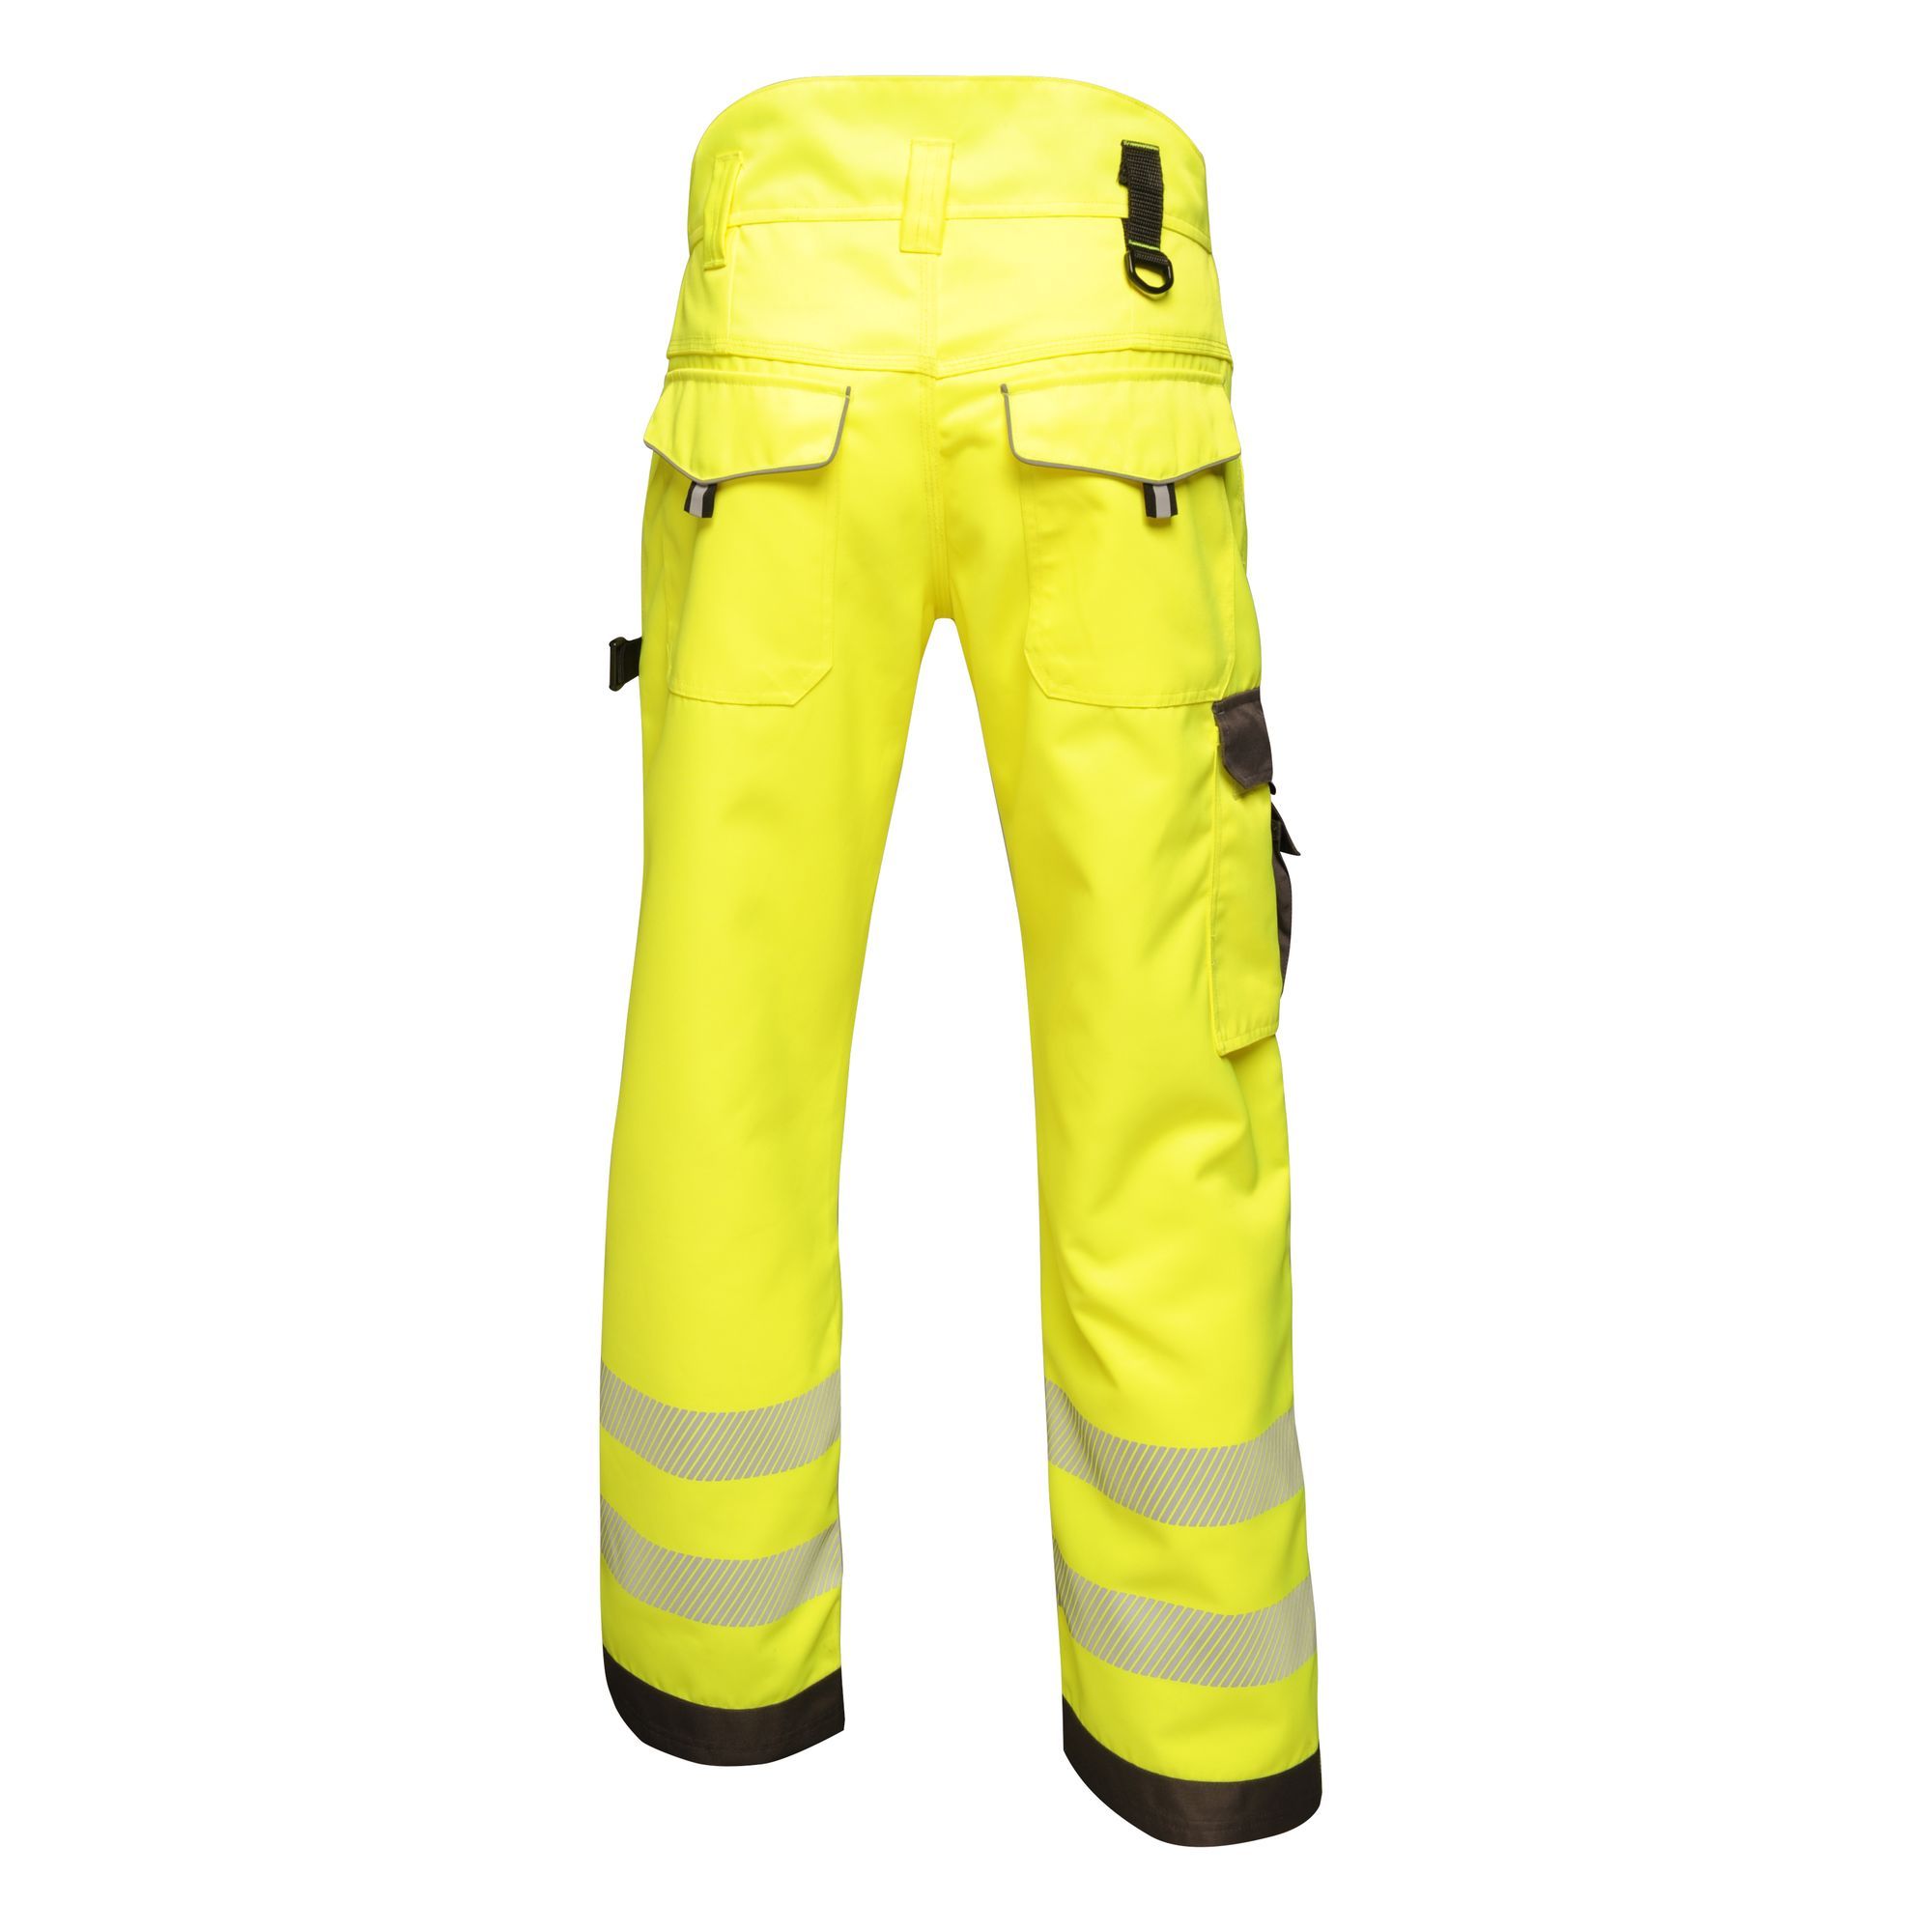 Material: 65% cotton, 35% polyester. EN ISO 20471:2013 +A1:2016 Class 1. CORDURA top loading knee pad pockets. Reinforced seams with triple stitching. Multi-function tool and mobile phone pockets to legs. 2 front pockets and 2 rear pockets. Shaped high back waistband for comfort. Inner anti-slip waistband print. Belt loops. D-ring attachment. Reinforced hem overlays. Compatible with Tactical Threads kneepad. Orange colour-way also conforms to RIS-3279/TOM when worn with RIS-3279-TOM Class 2 upper body cloth.